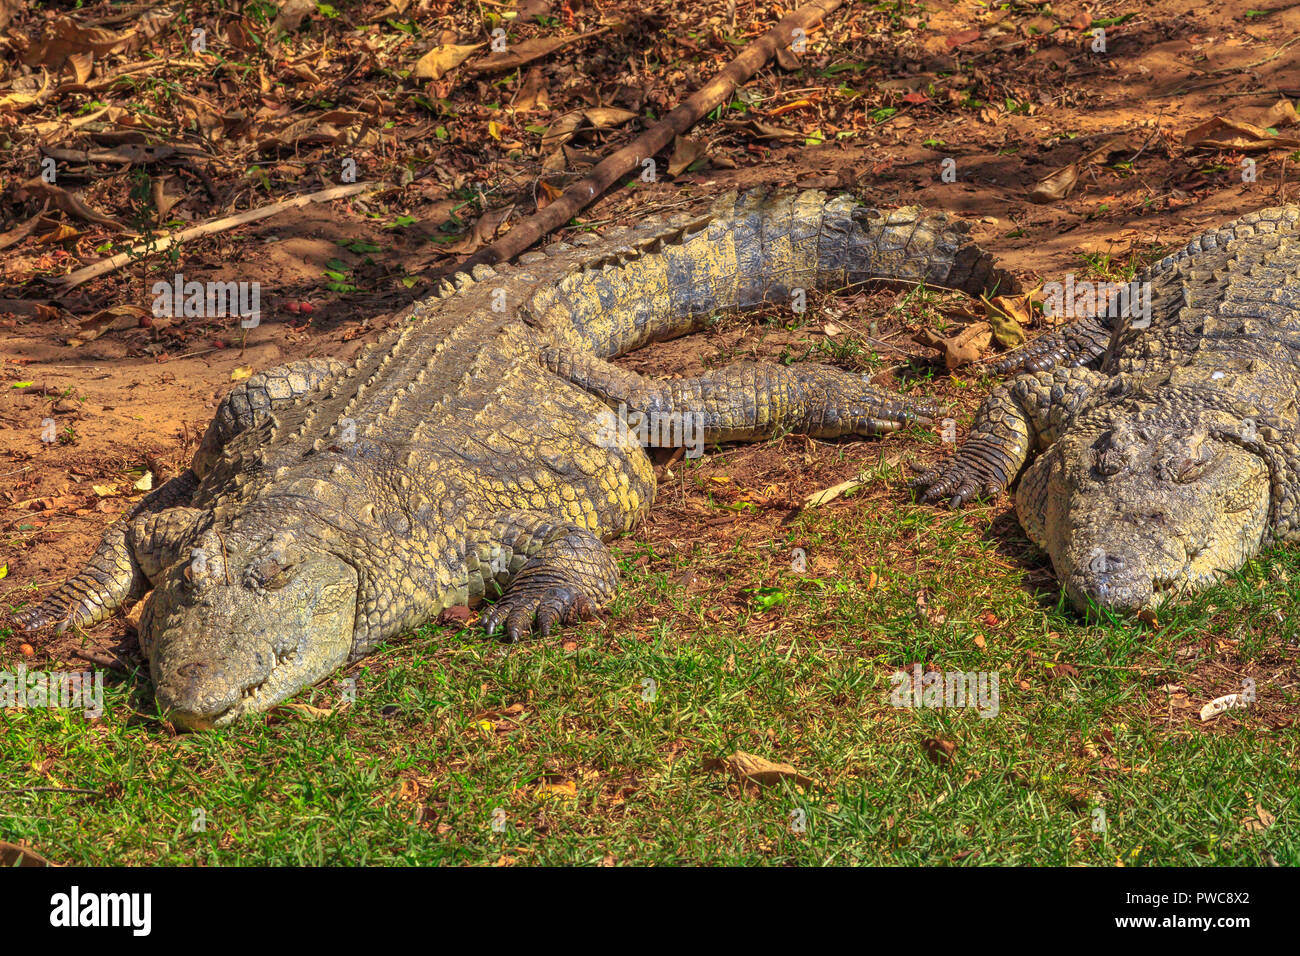 Two African Crocodiles species Crocodylus Niloticus, sleeping at iSimangaliso Wetland Park in St Lucia Estuary, South Africa, one of the top Safari Tour destinations. Stock Photo